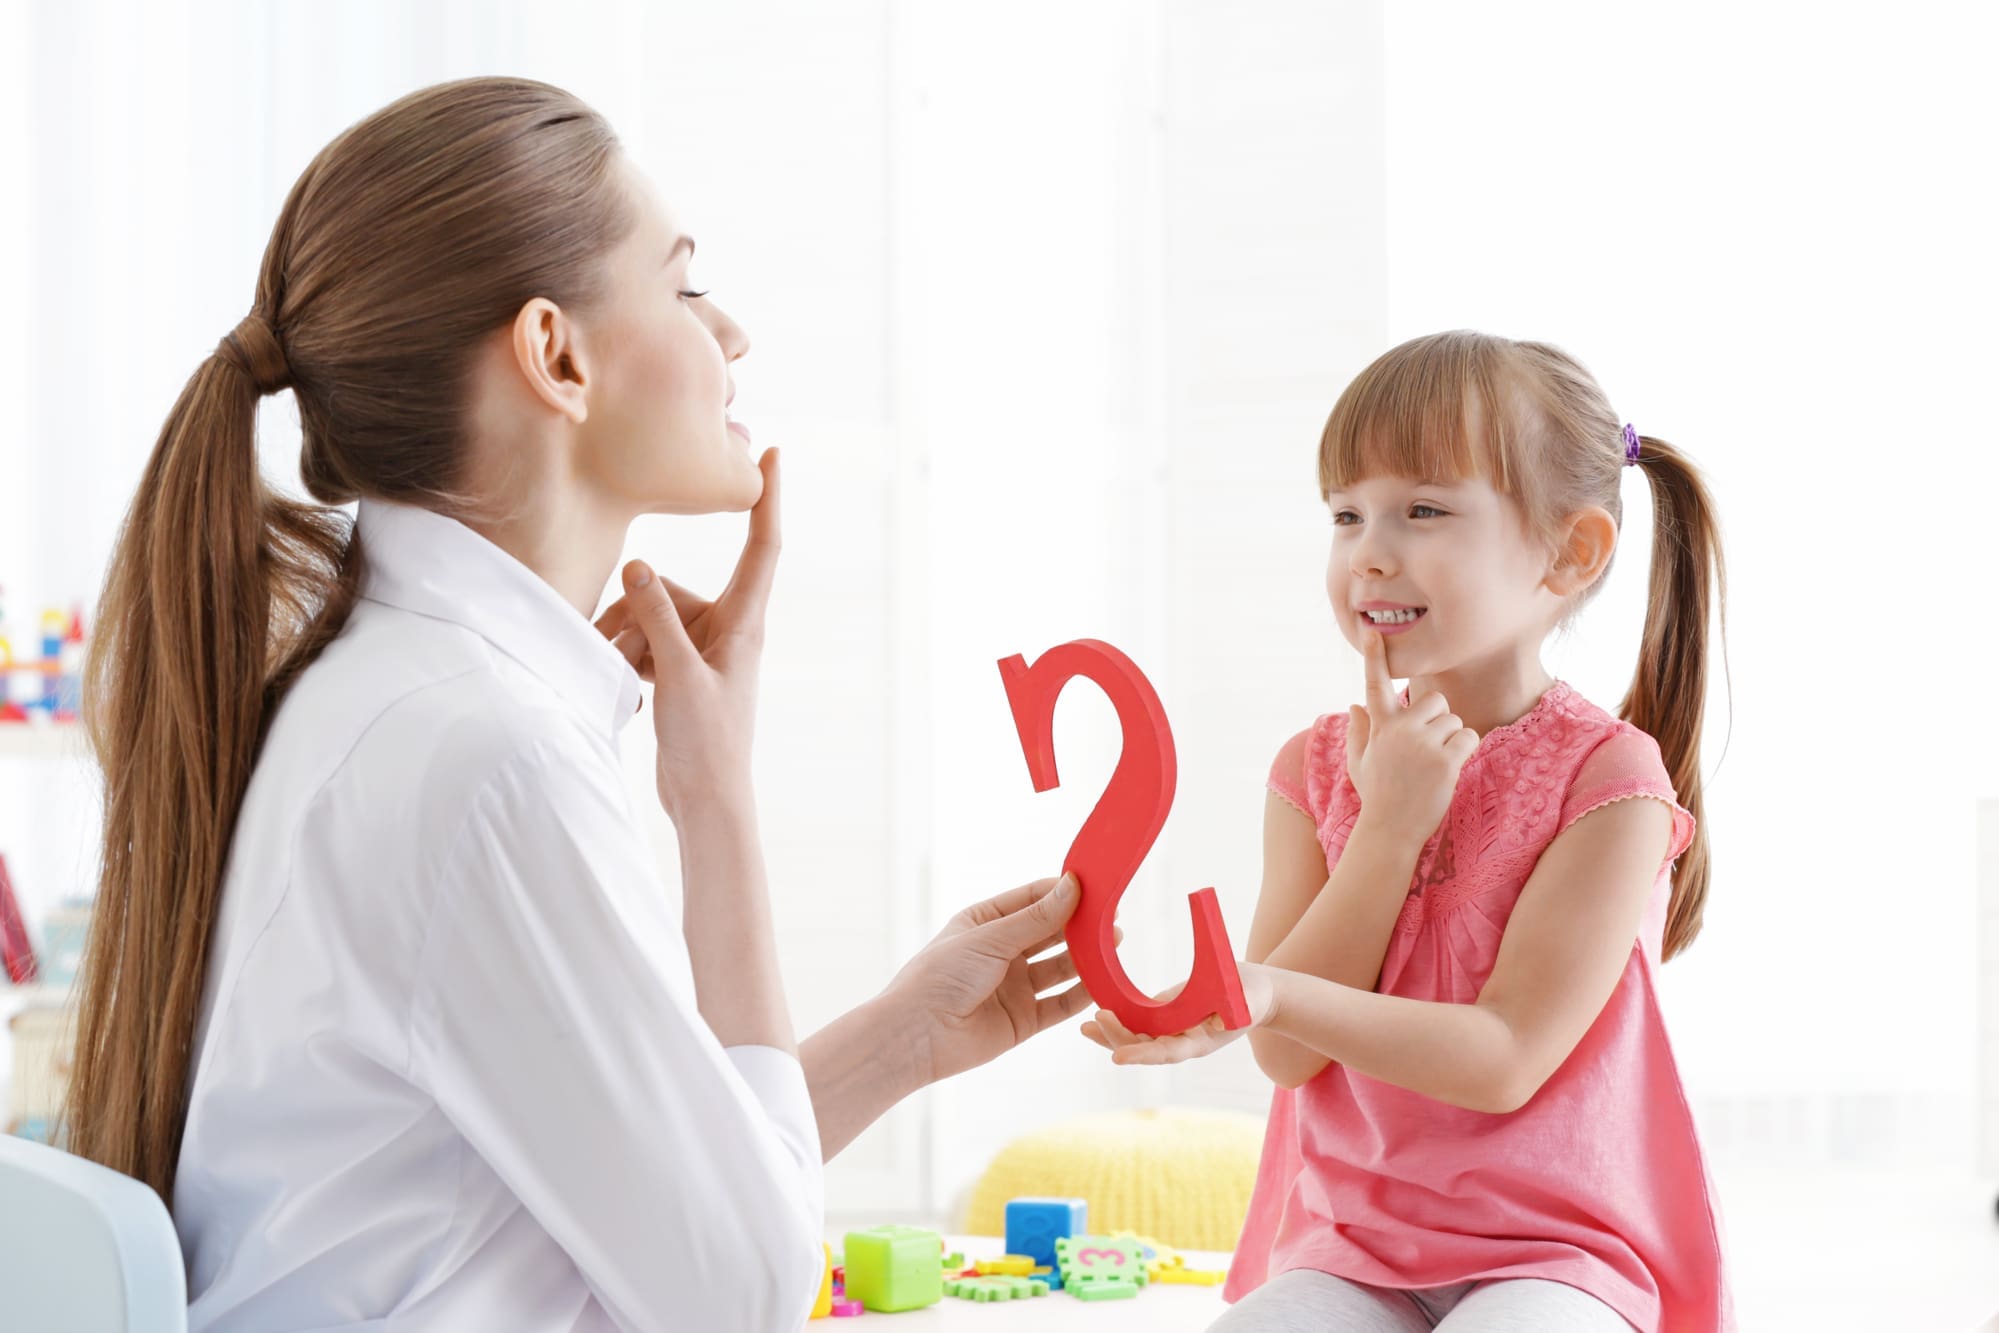 pronunciation speech and language therapy session for adults and children | District Speech & Language Therapy | Washington D.C. & Northern VA